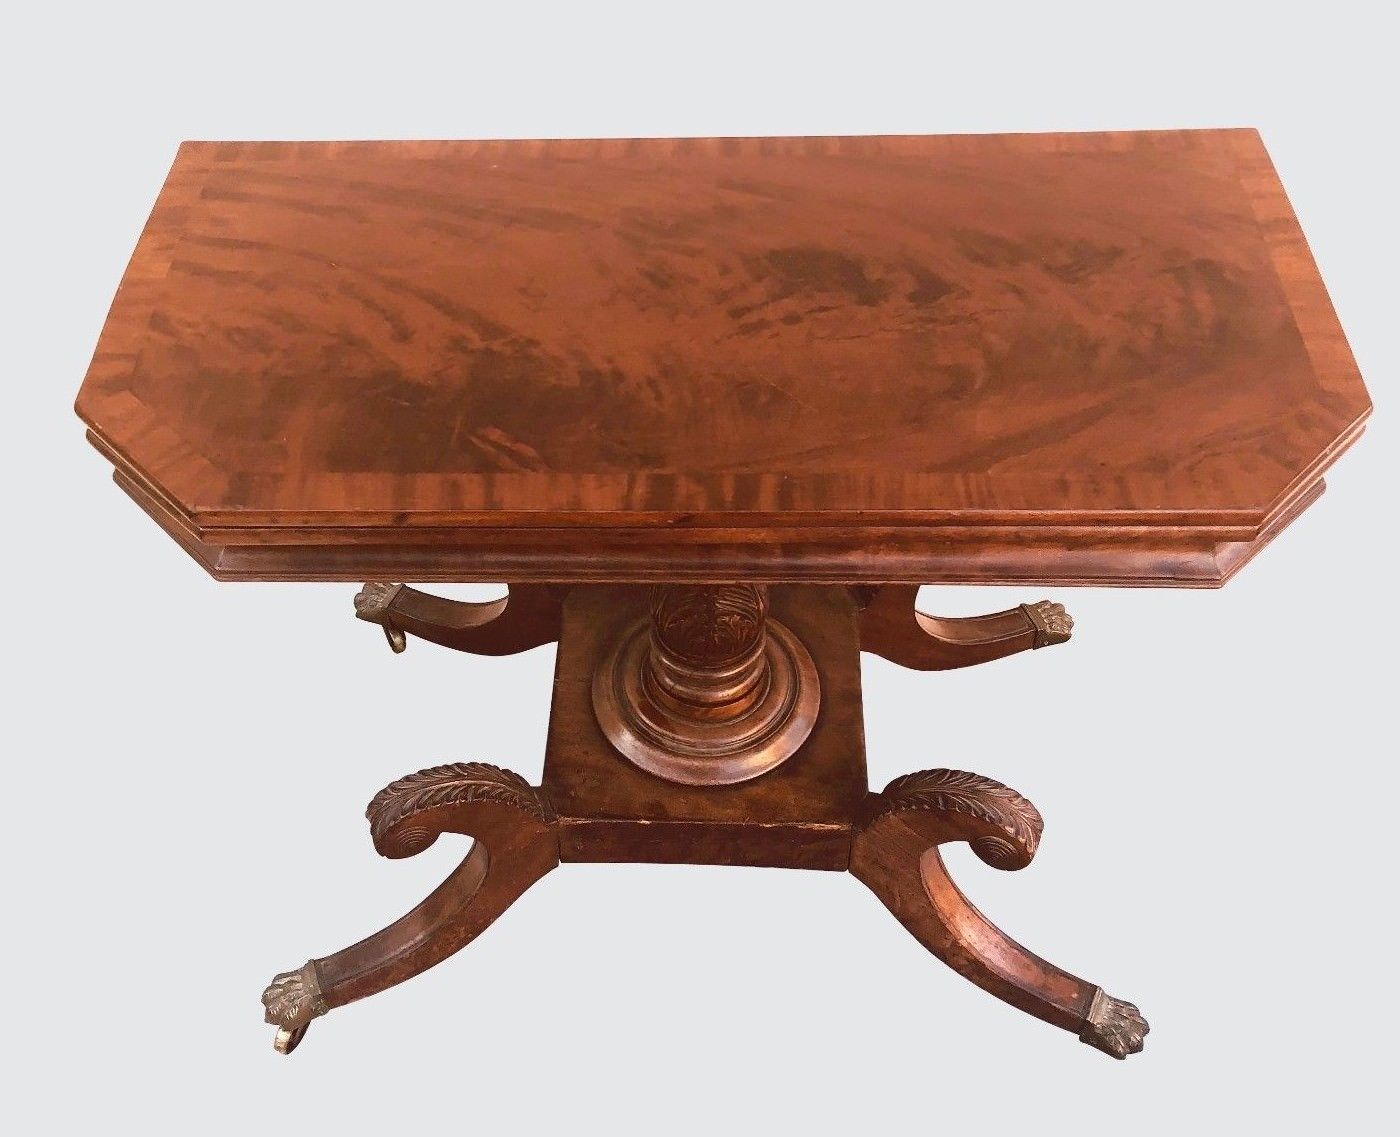 EARLY 19TH CENTURY CLASSICAL CROSS BANDED INLAID PHILADELPHIA CARVED GAME TABLE